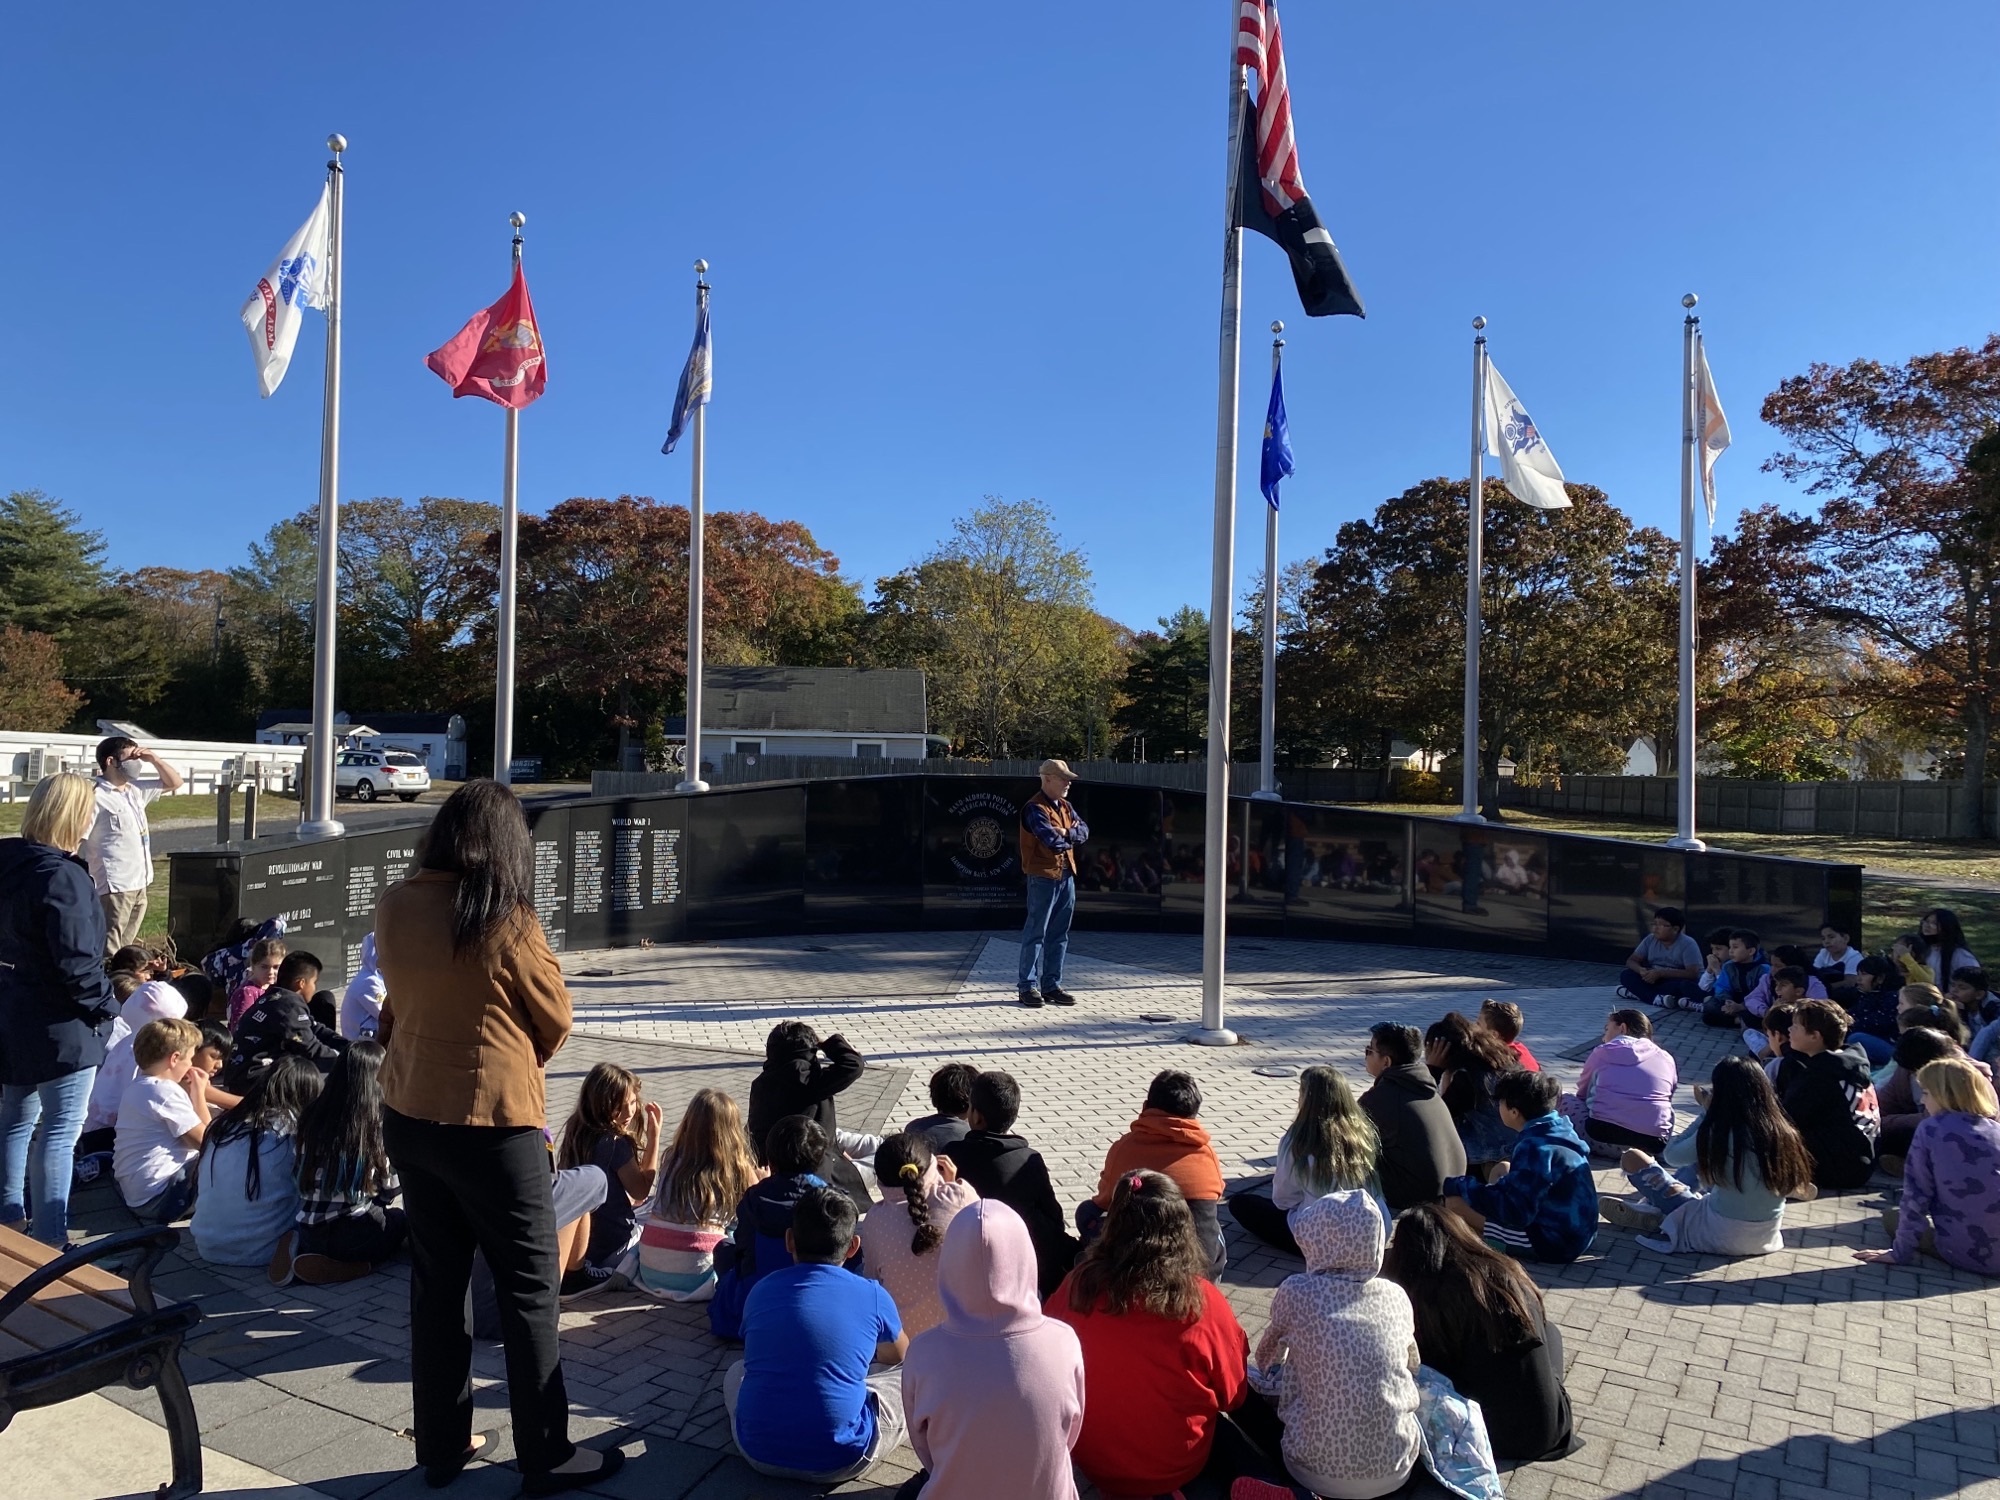 As part of their social studies curriculum, Hampton Bays Elementary School fourth grade students recently visited the American Legion Post 924. During the tour, the students heard from local veterans about the history of Veterans Day and the flags flown at the legion. COURTESY HAMPTON BAYS SCHOOL DISTRICT